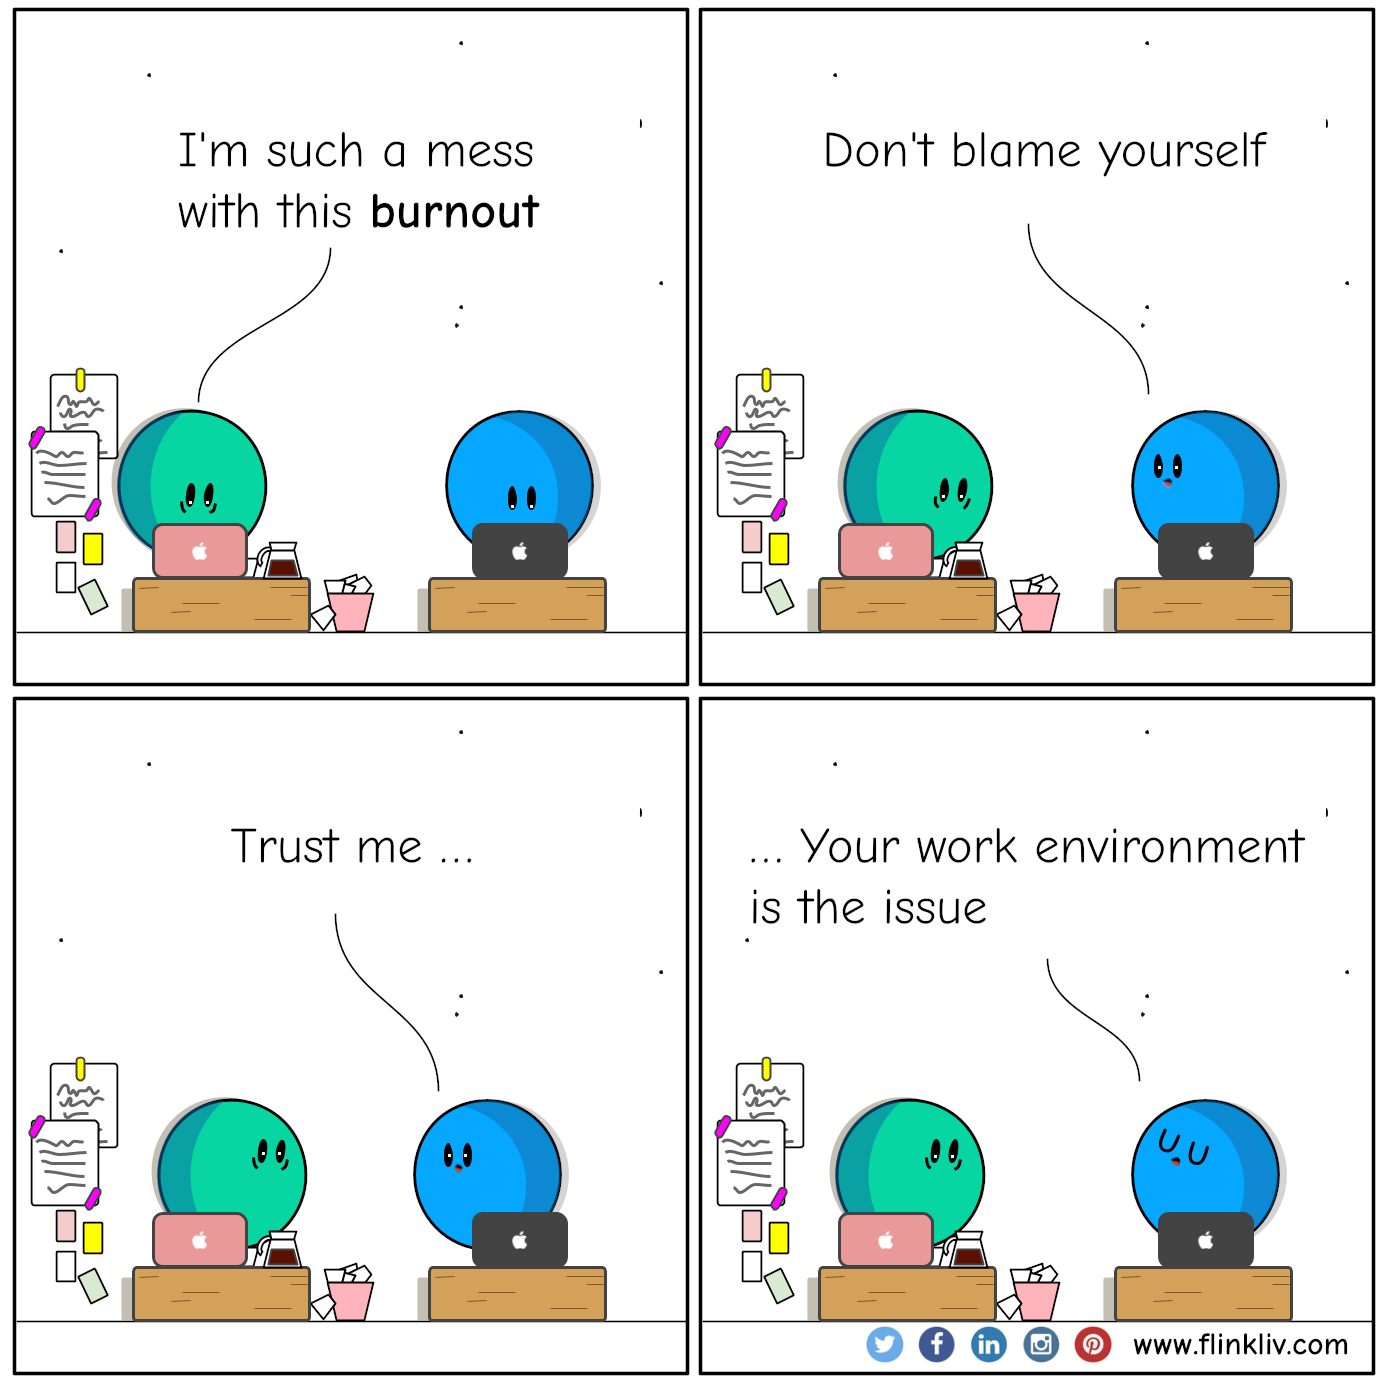 Conversation between A and B about how to offer compassion to people with burnout. A: I'm such a mess with this burnout B: Don't blame yourself. B: Trust me, your work environment is the issue. By flinkliv.com